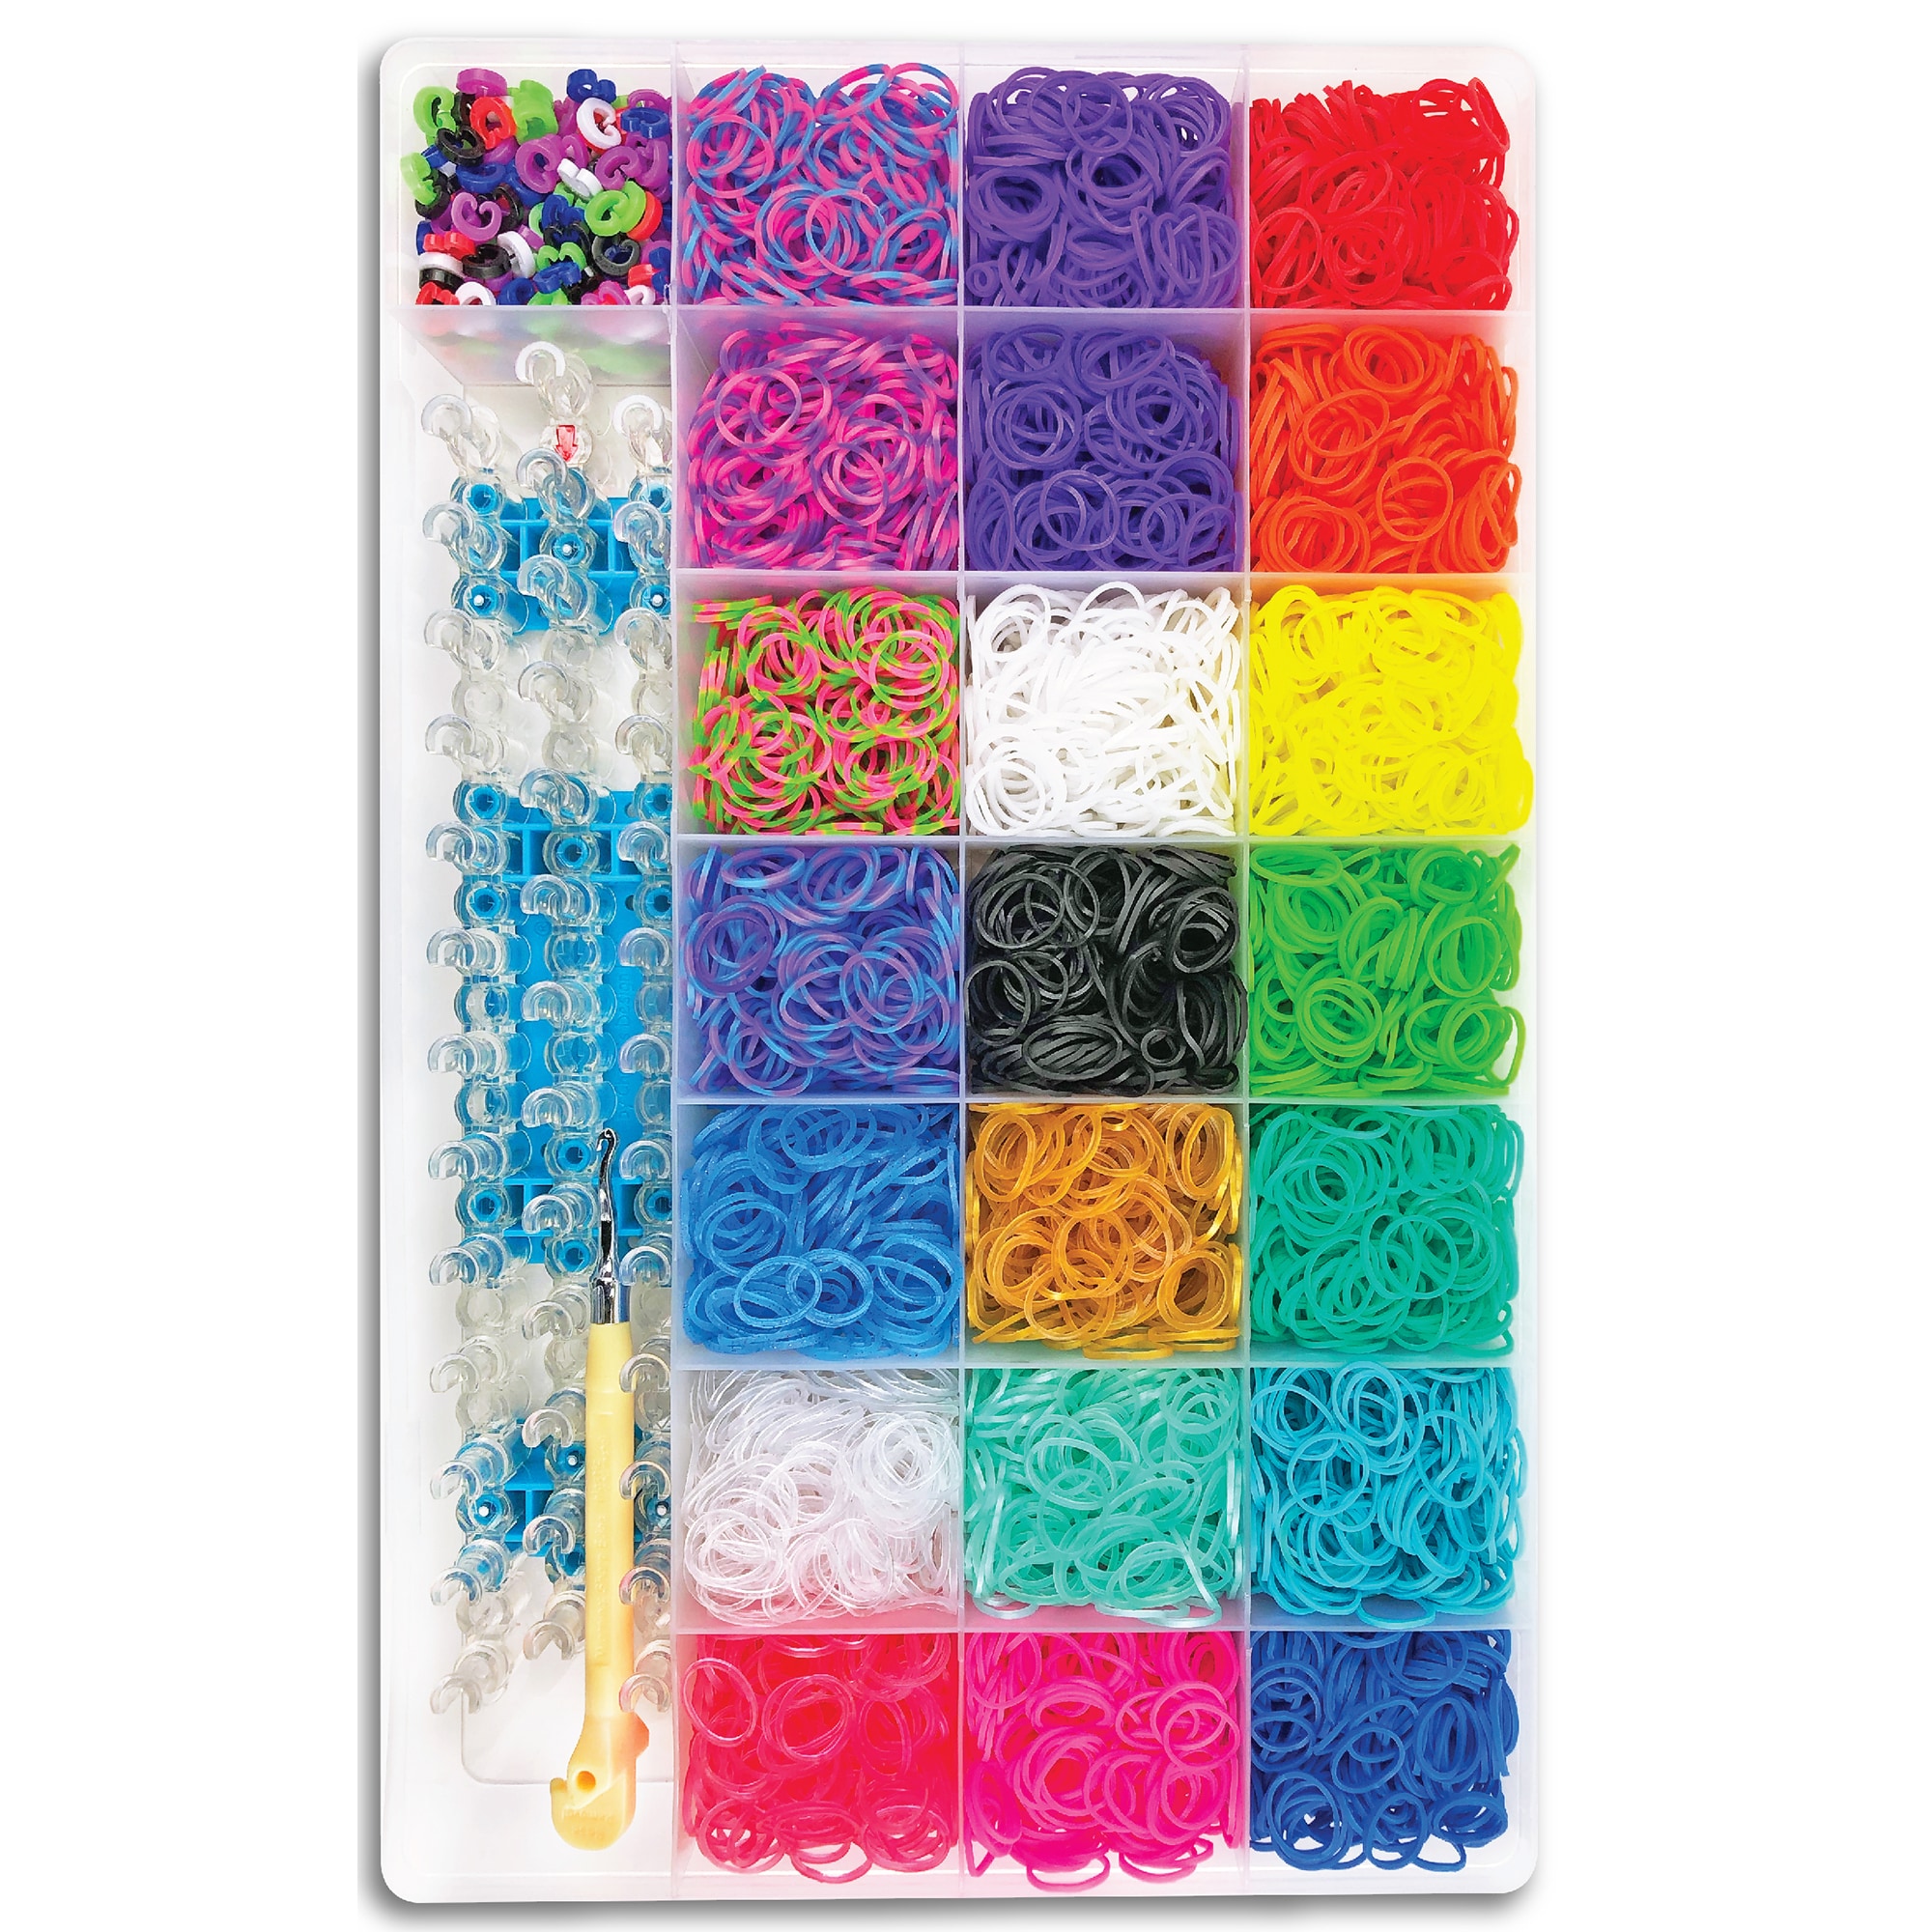 Rainbow Loom MEGA Combo Rubber Band Bracelet Kit - Creative Play Toy for  Kids (7+ Years) - Includes 7,000 Rubber Bands, 300 Colored C-Clips,  Carrying Case, and 12 Gift Bags in the